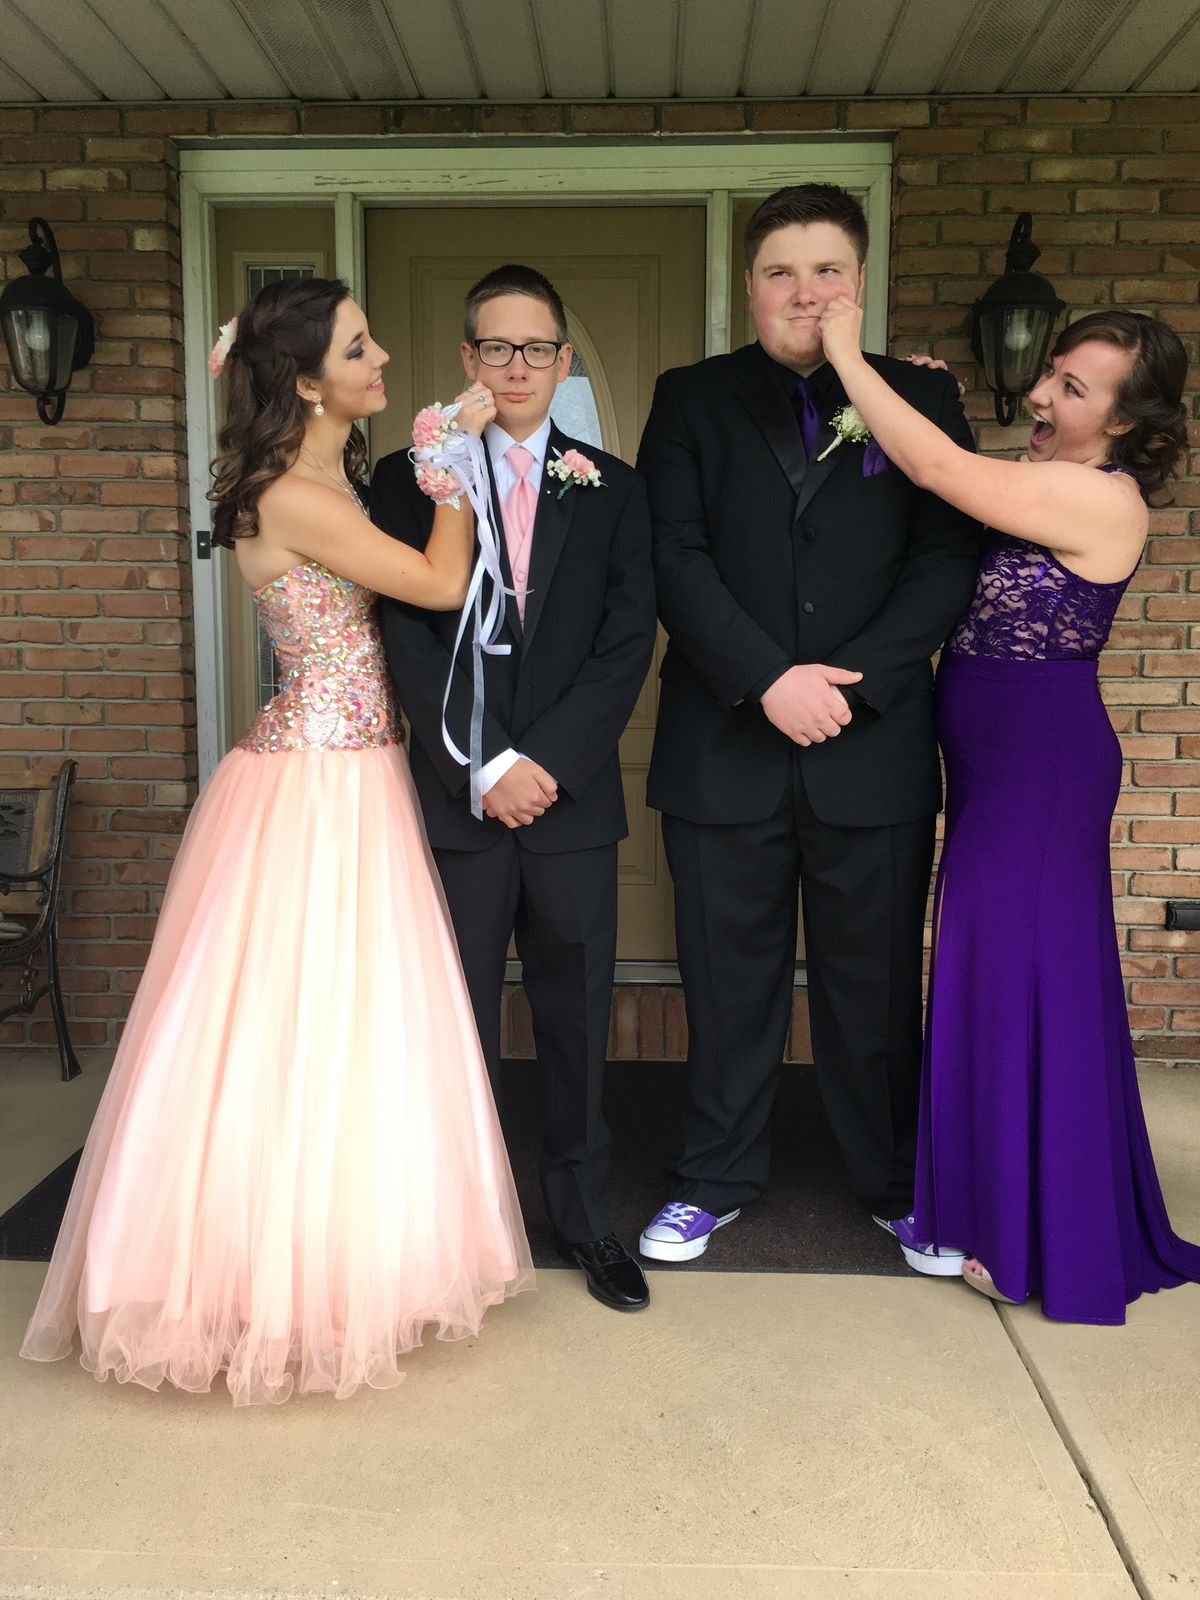 5 Things That Happen When You Go To Prom While In College